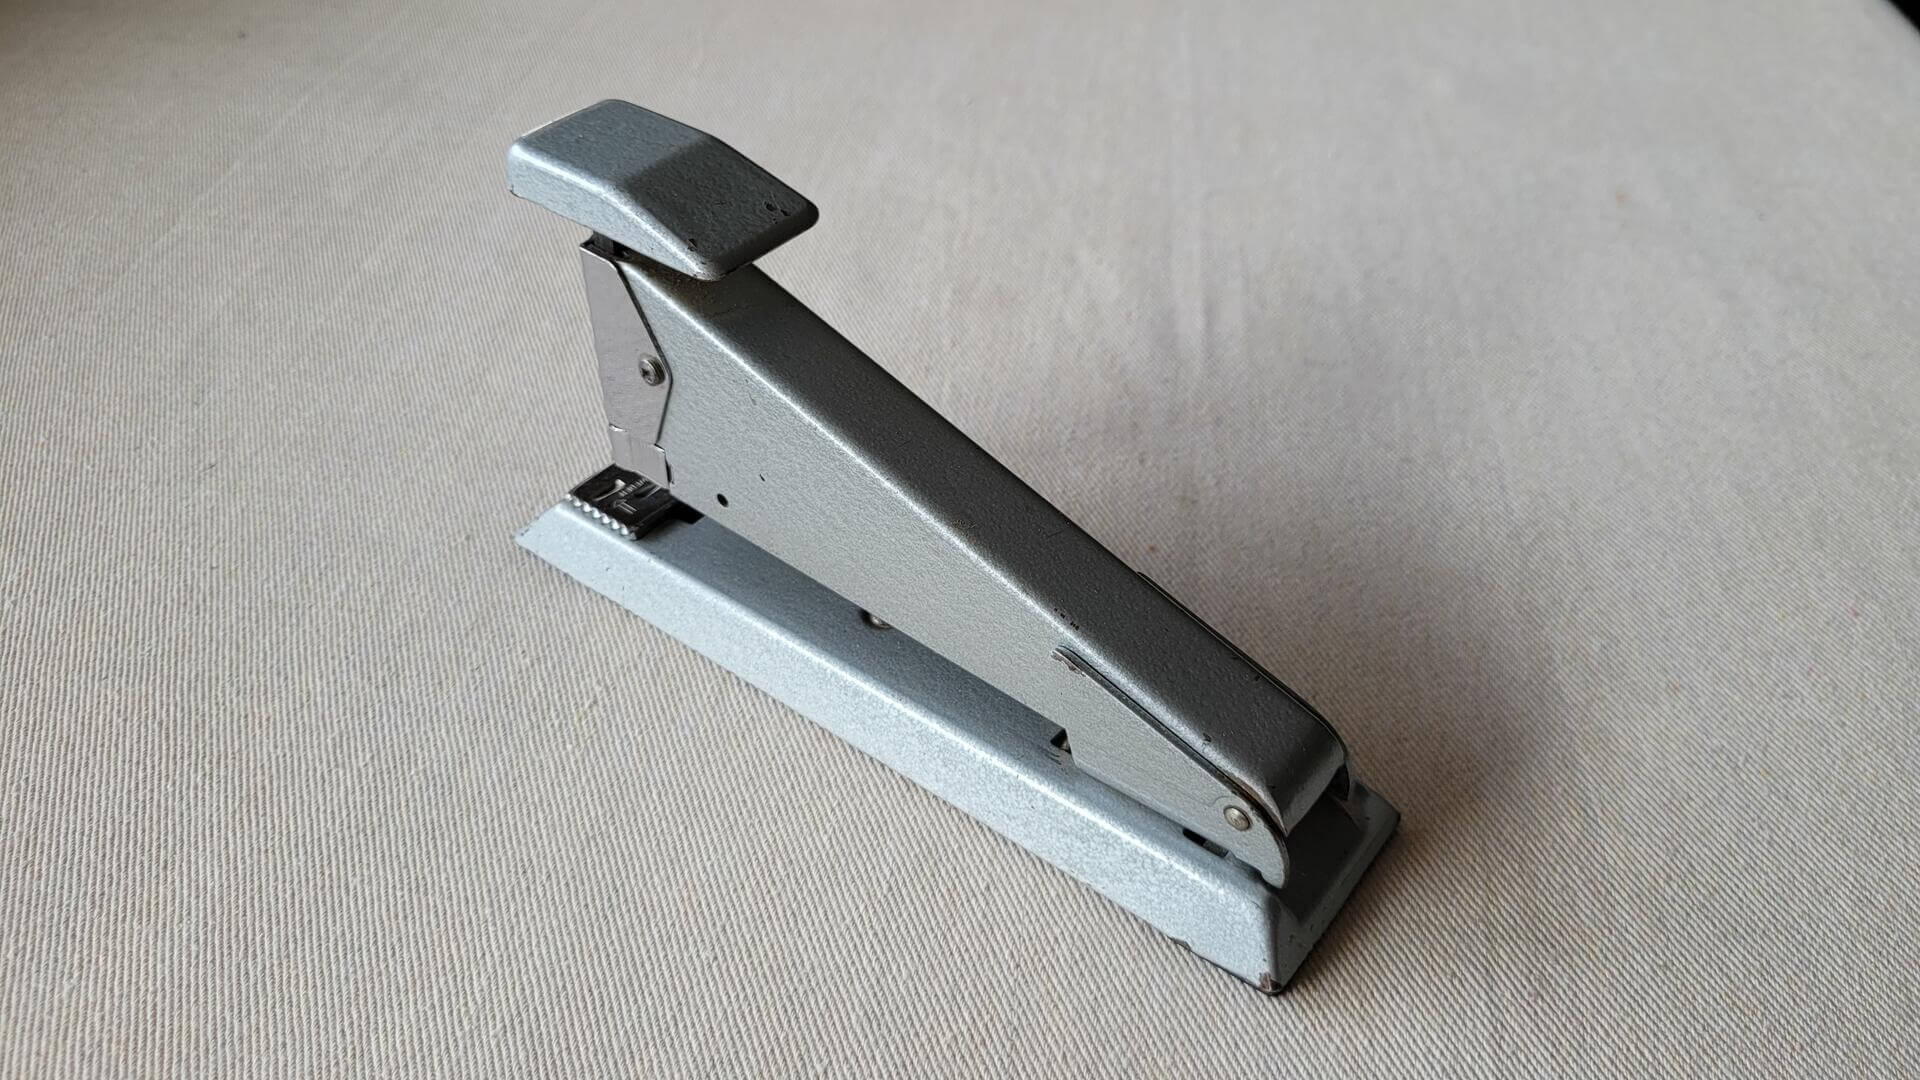 Apsco Stapler Model 2002 blue and chrome colour Isaberg Verkstadts Design AB Hestra. Solid steel made in Sweden MCM collectible office tools & equipment